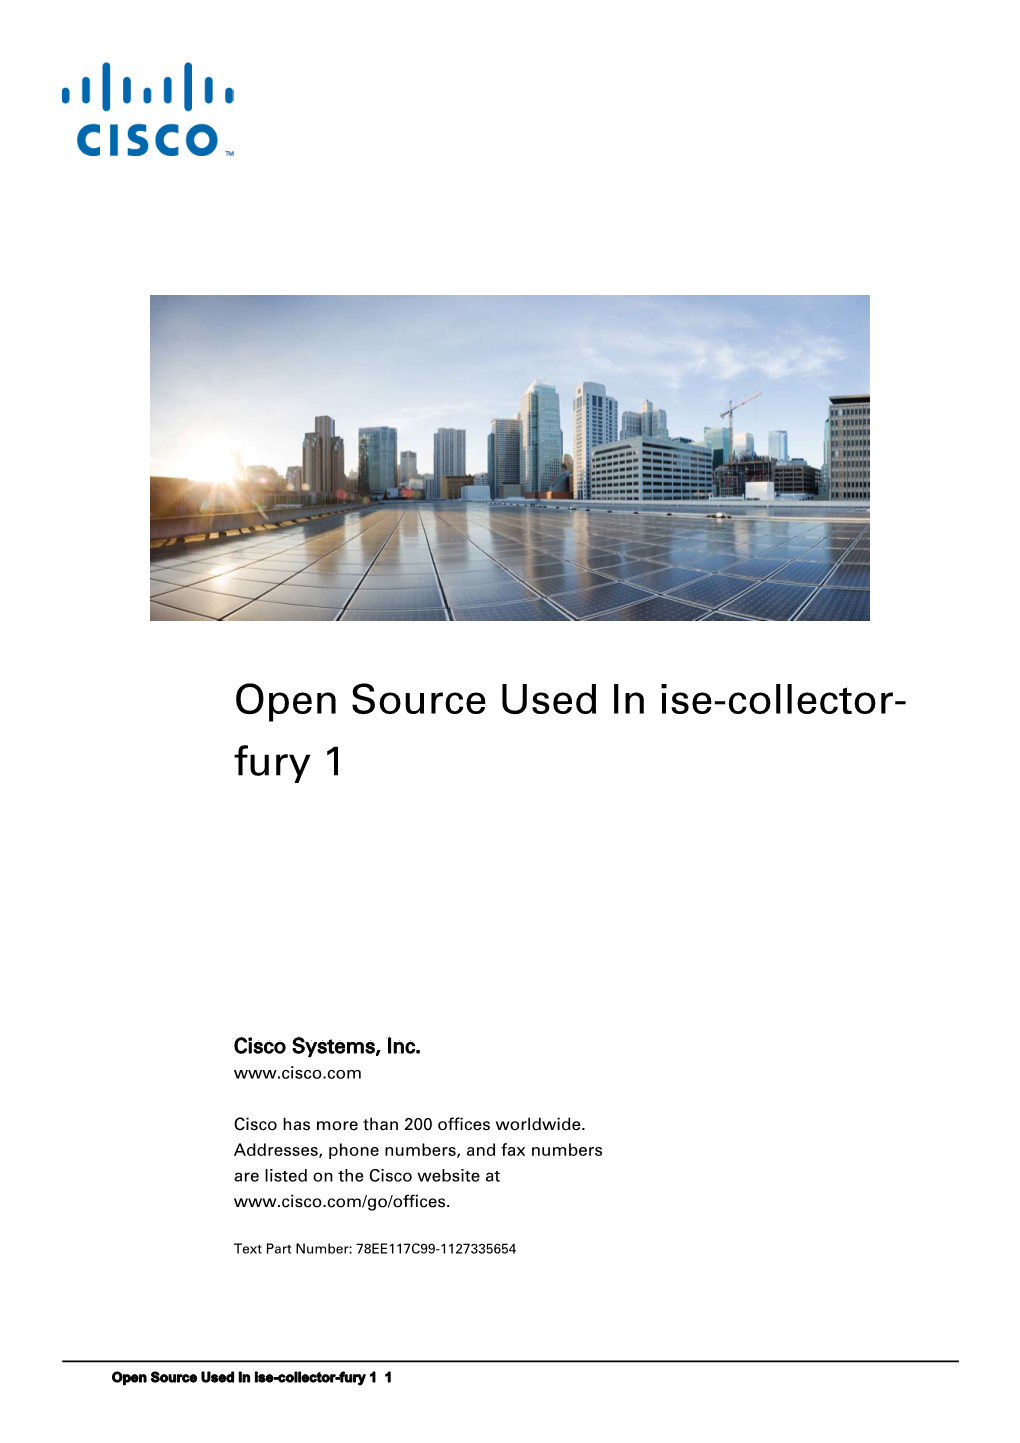 Open Source Used in Ise-Collector-Fury 1 1 This Document Contains Licenses and Notices for Open Source Software Used in This Product